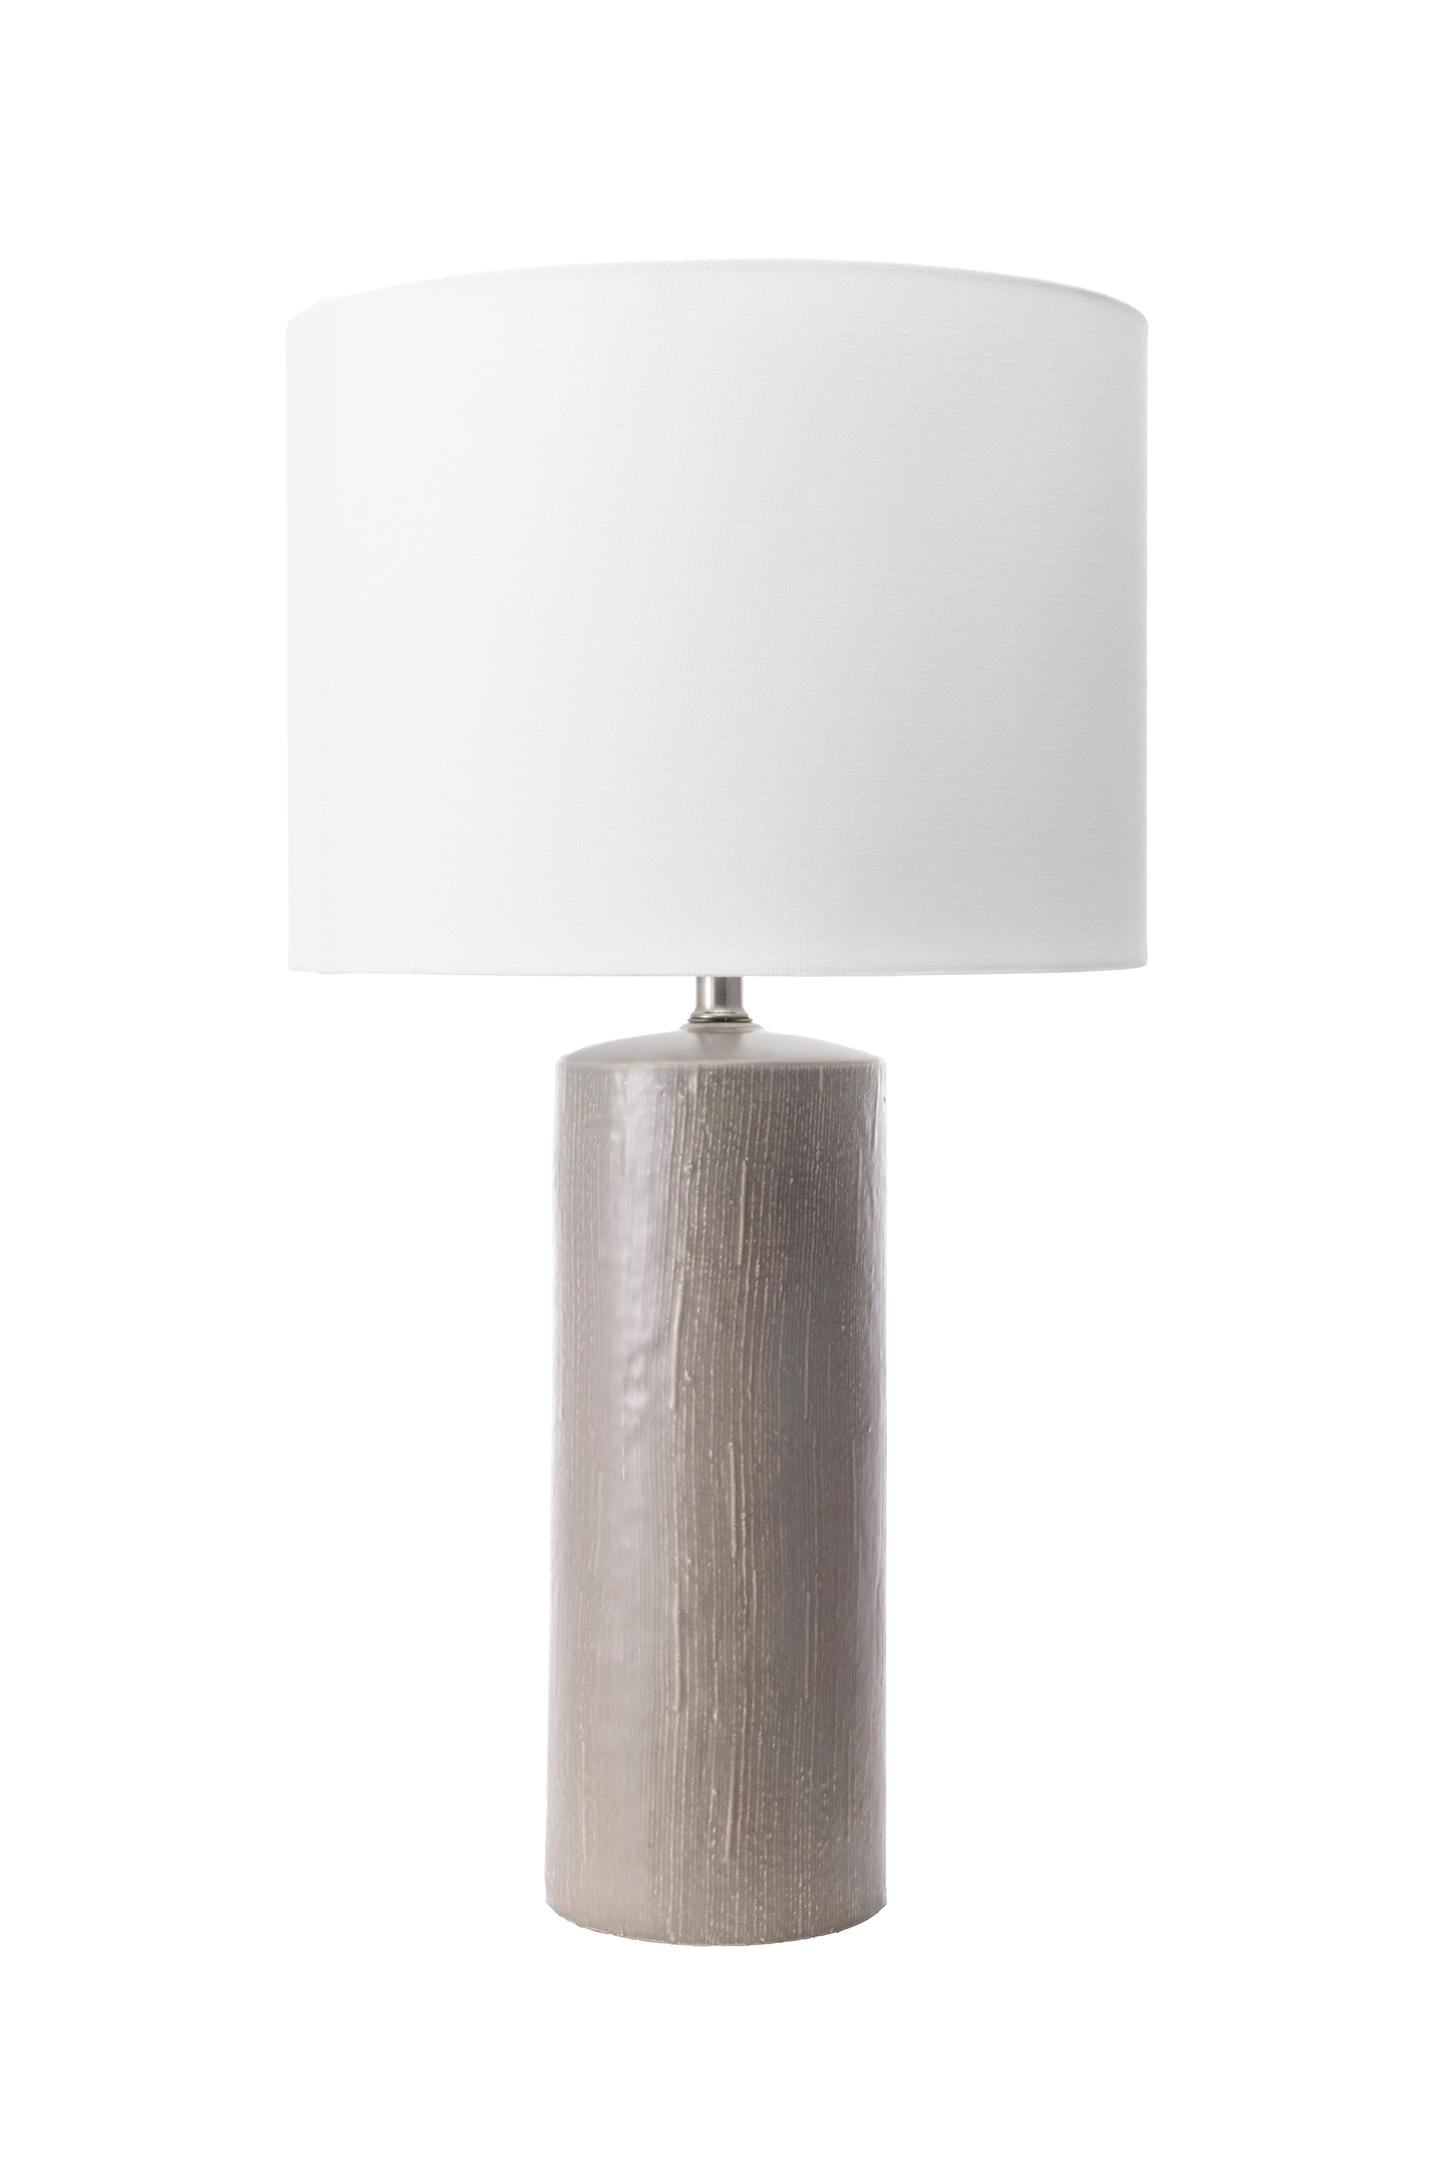 25 Inch Tangela Ridged Ceramic Linen, Tall Thin Silver Table Lamps Set Of 2